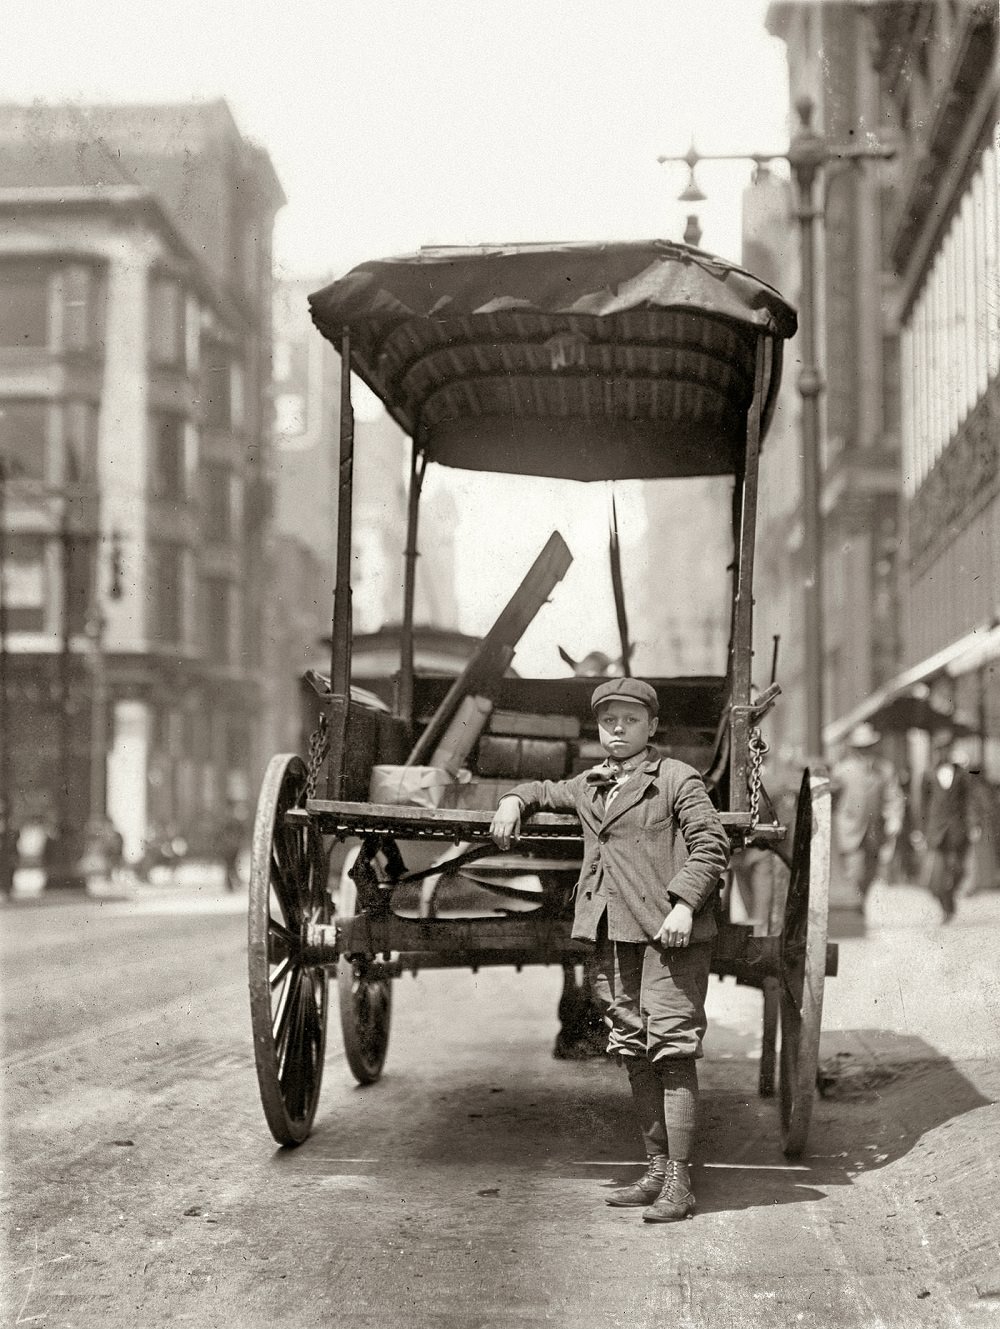 Adams Express Company, one of the many young boys working as assistants on express wagons, St. Louis, 1910